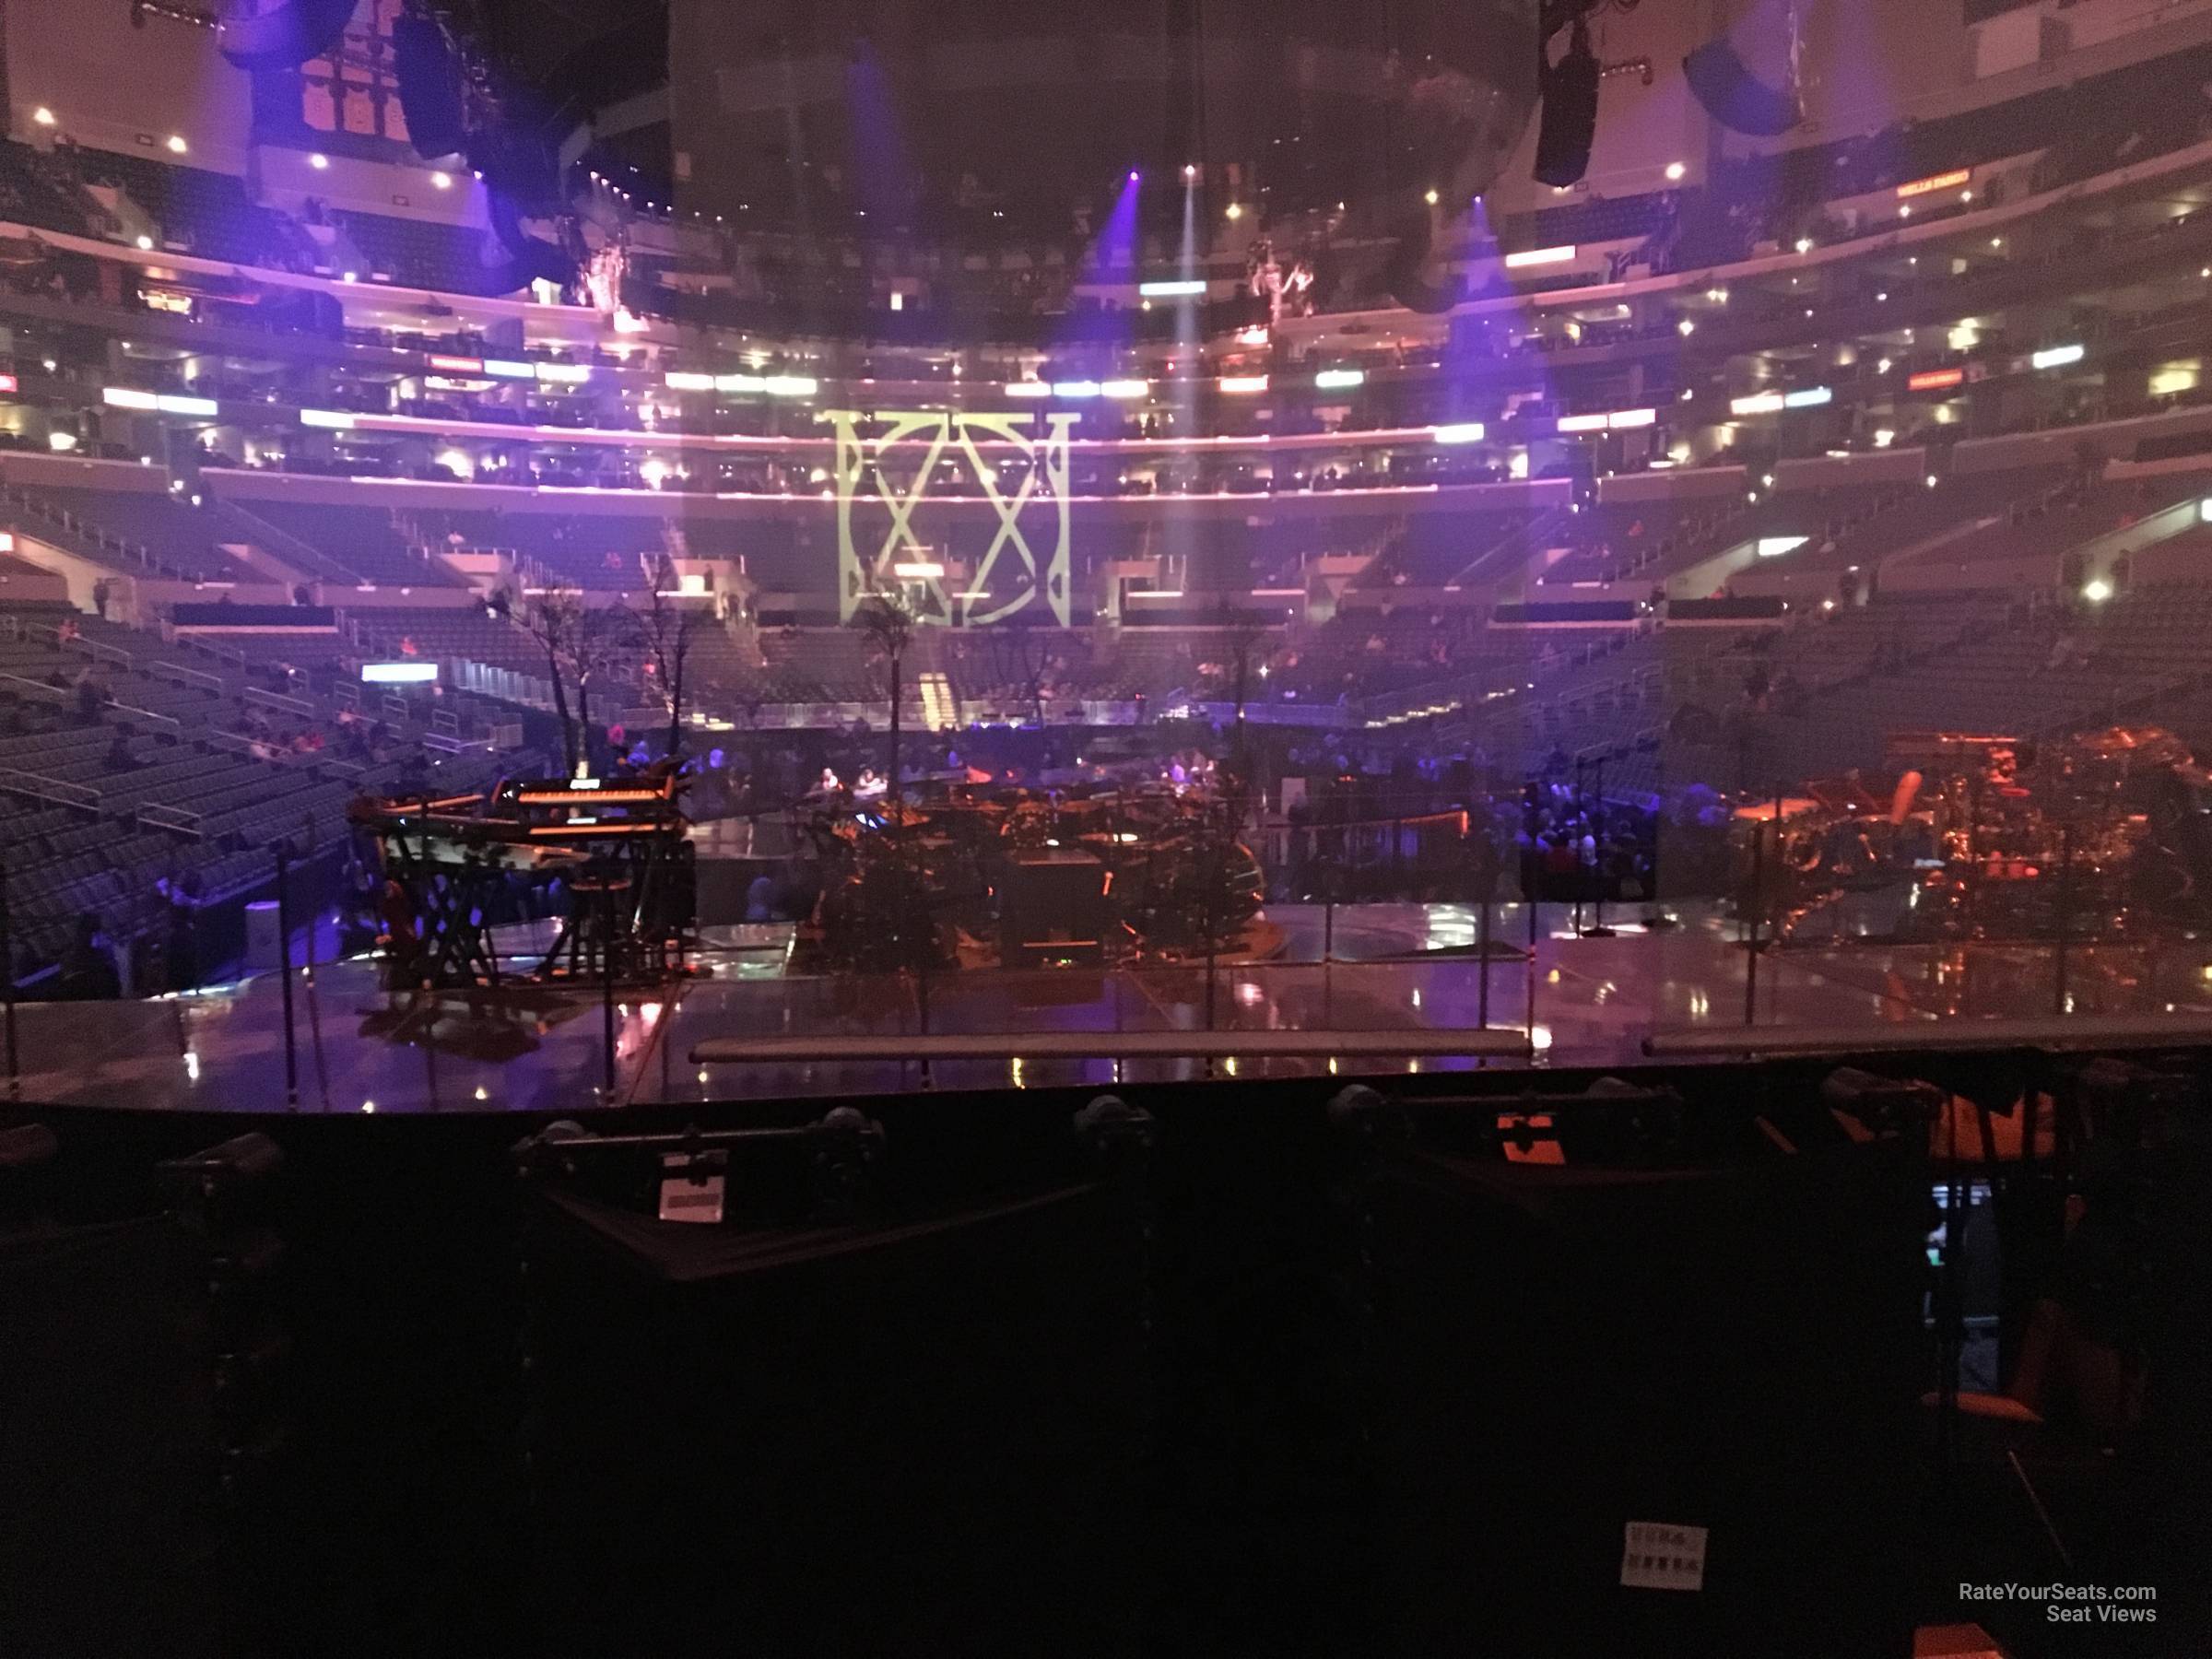 section 116, row 15 seat view  for concert - crypto.com arena